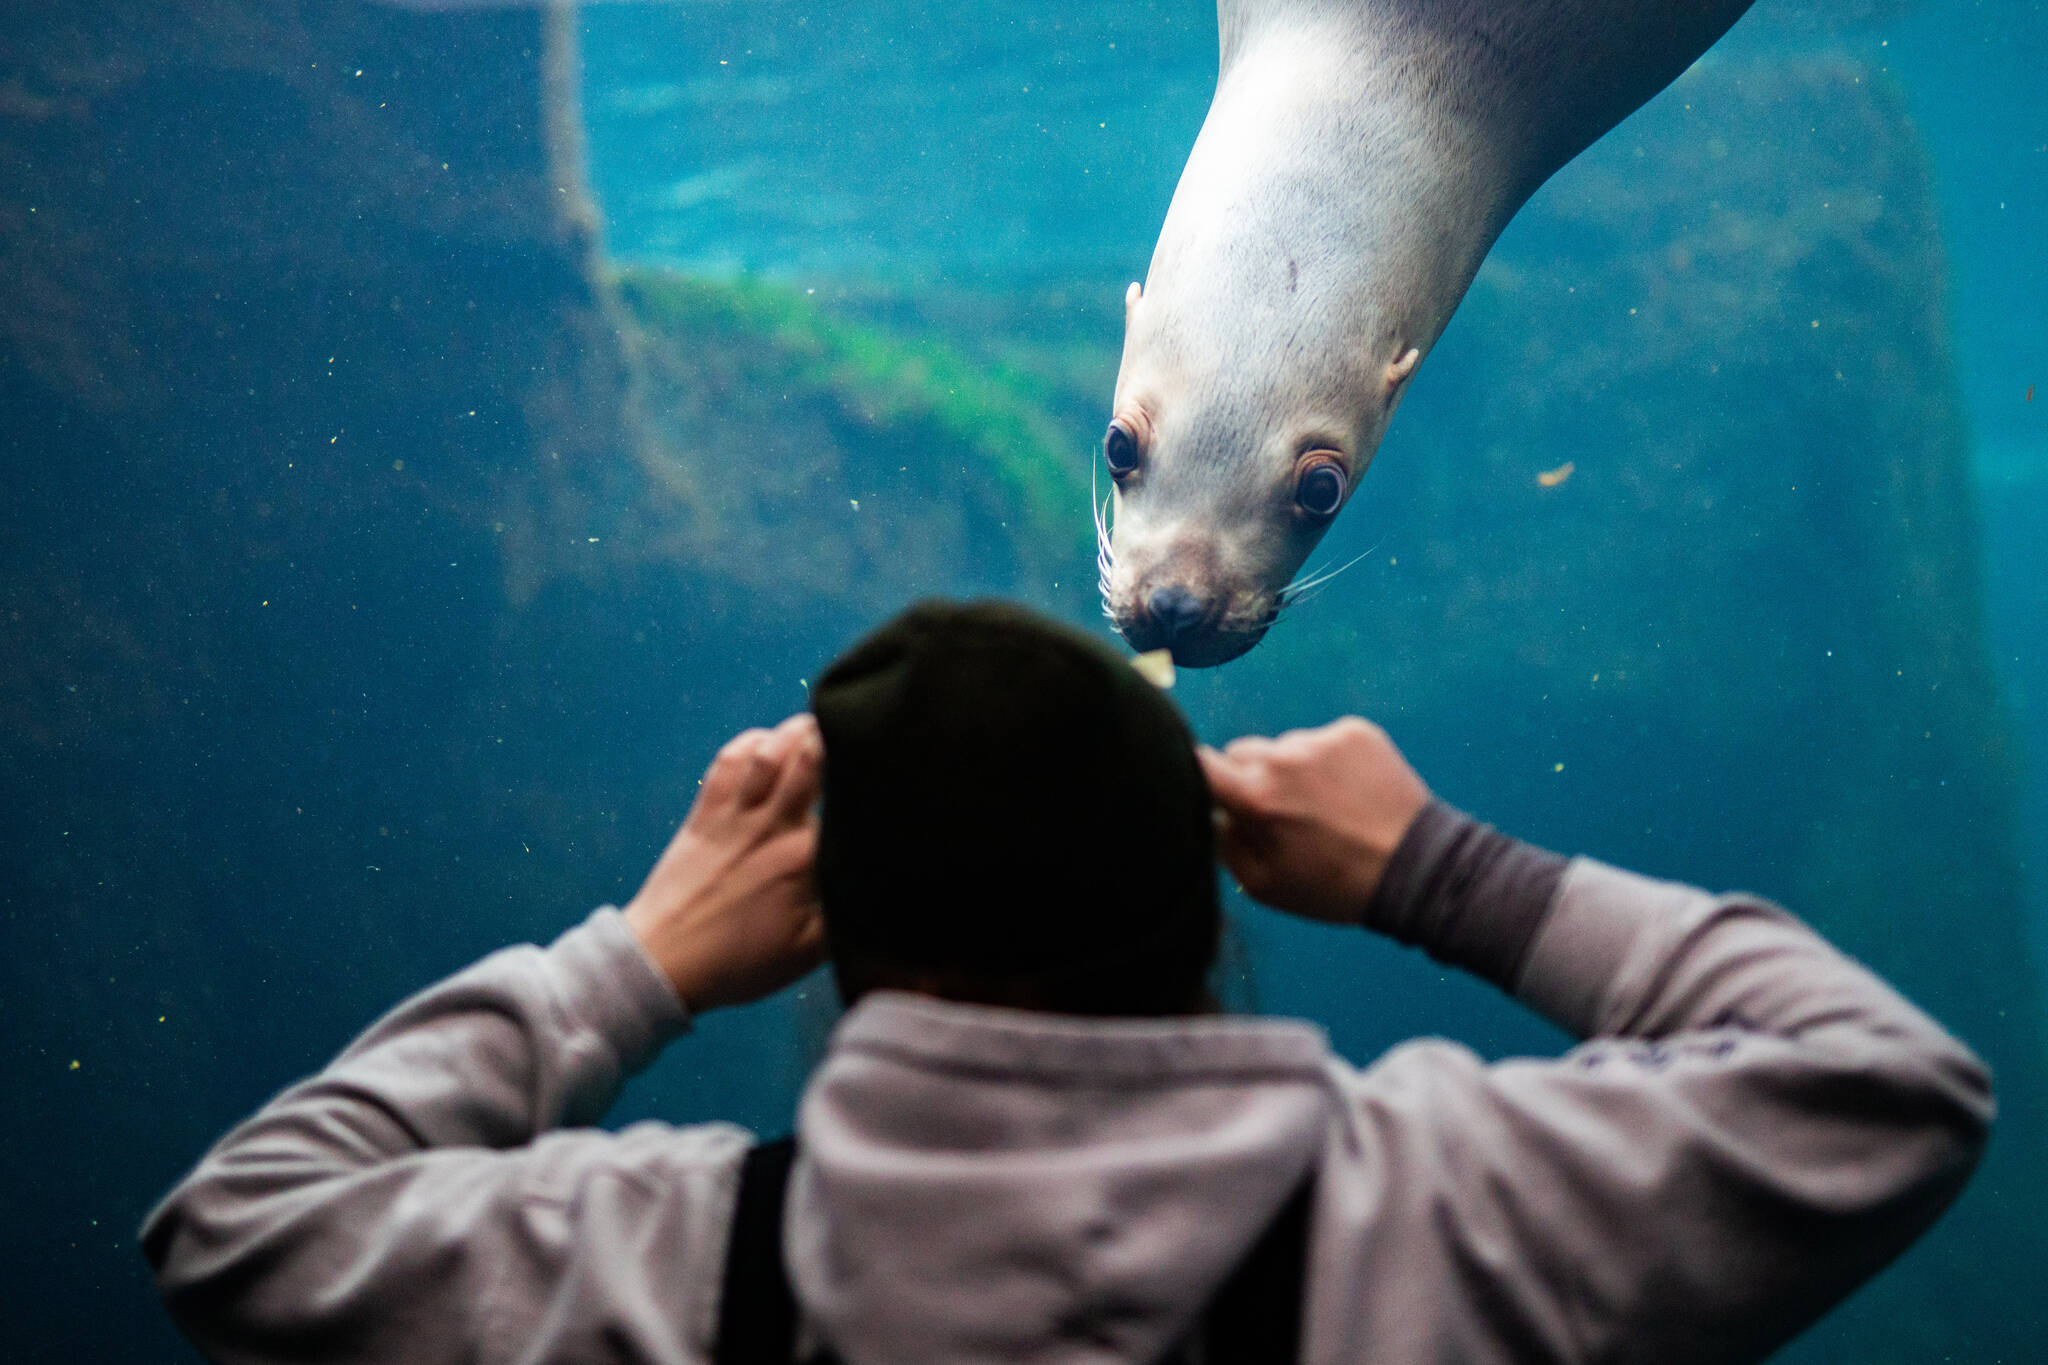 Alaska SeaLife Center Seasonal Animal Care Specialist Emma Begalka interacts with Mist the Steller sea lion in the Underwater viewing area at the Alaska SeaLife Center during an enrichment session on Nov. 30, 2022. Mist unexpectedly passed away on January 23, 2023 after staff observed seizure-like tremors. (Photo courtesy Kaiti Grant/Alaska SeaLife Center)